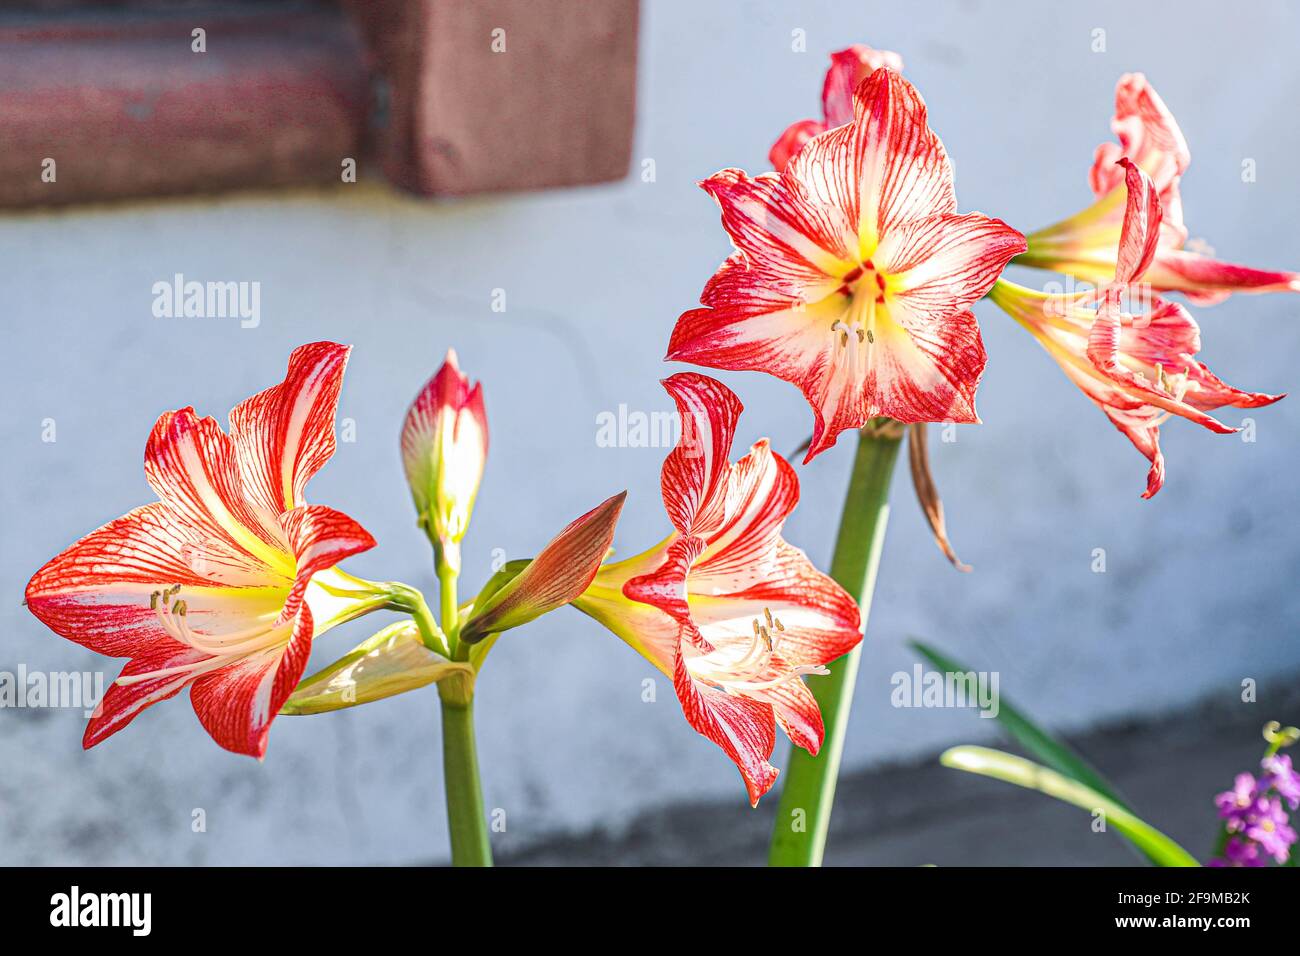 Amaryllis Flaming Peacock, Lilium, Lily, Red and White Double Amaryllis,  Amaryllis Bulbs, Amaryllis Flowers Amaryllis Plants, Flaming Amaryllis  Peacock, Flowers, Pink, Striped, Petals, Houseplant, Plant, Spring ... (  Photo by Luis Gutierrez /